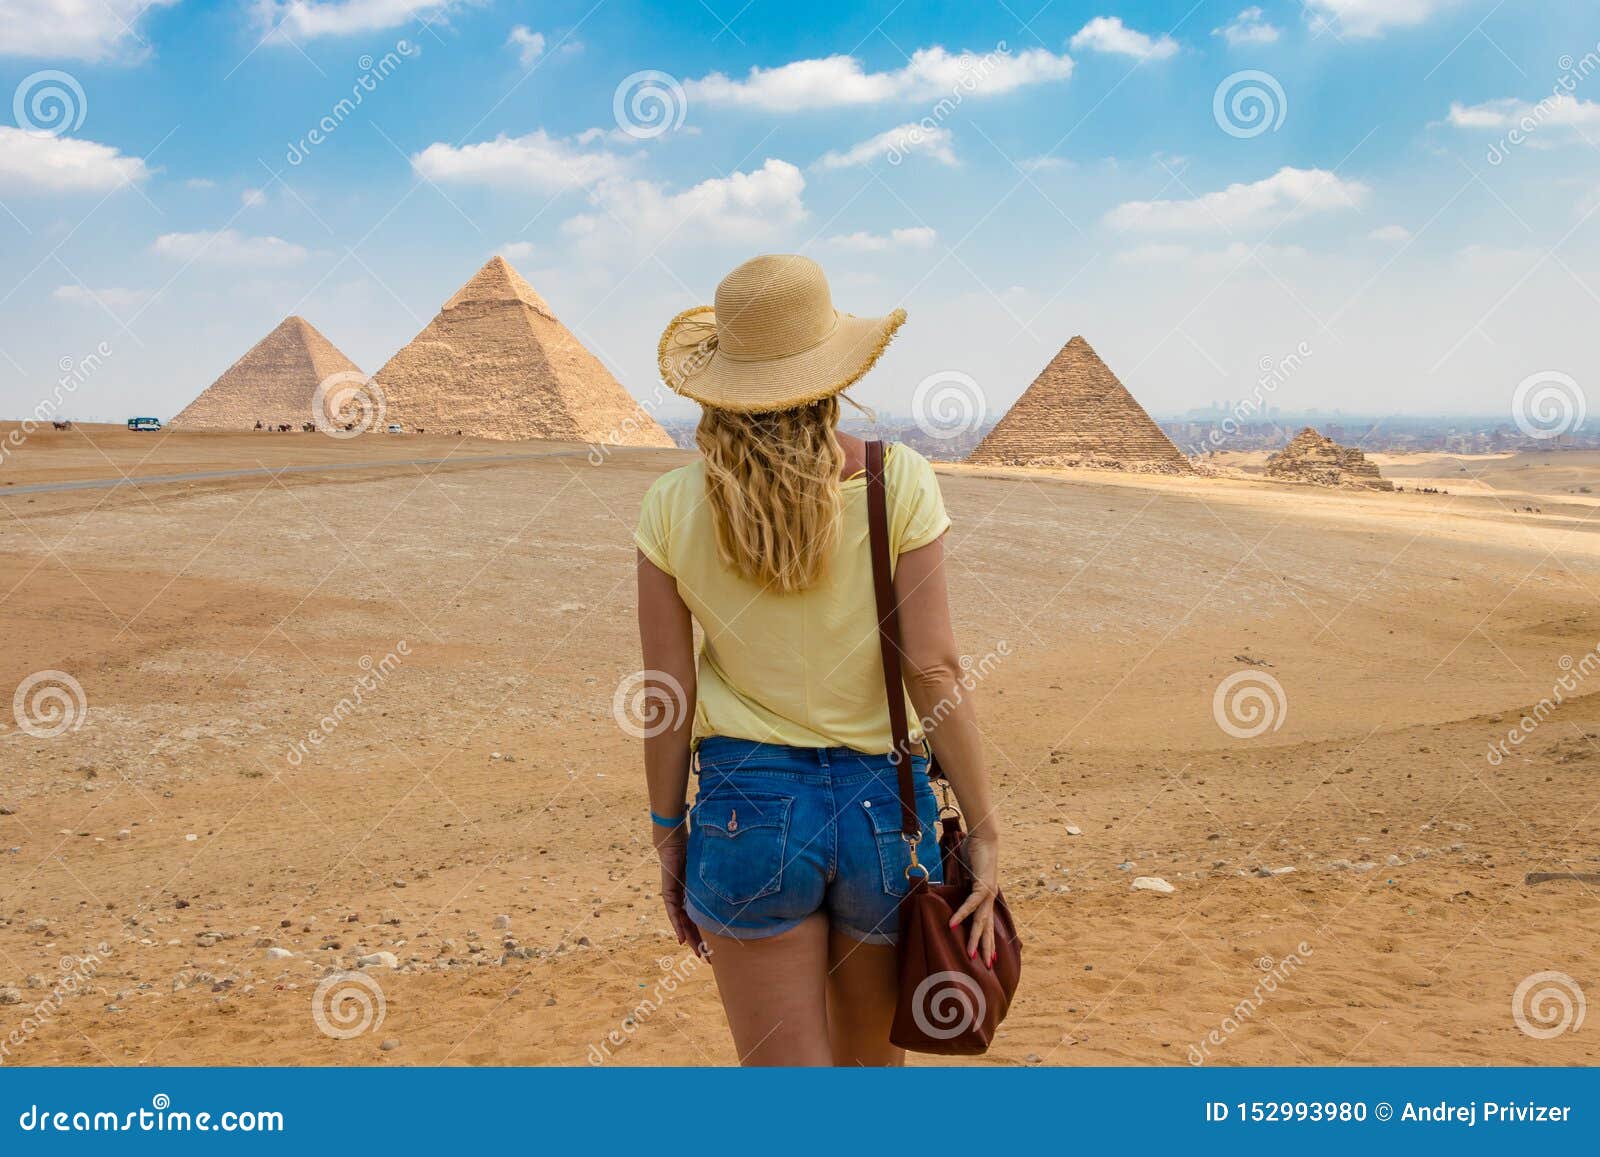 back view of the young female watching the great pyramids of giza in egypt